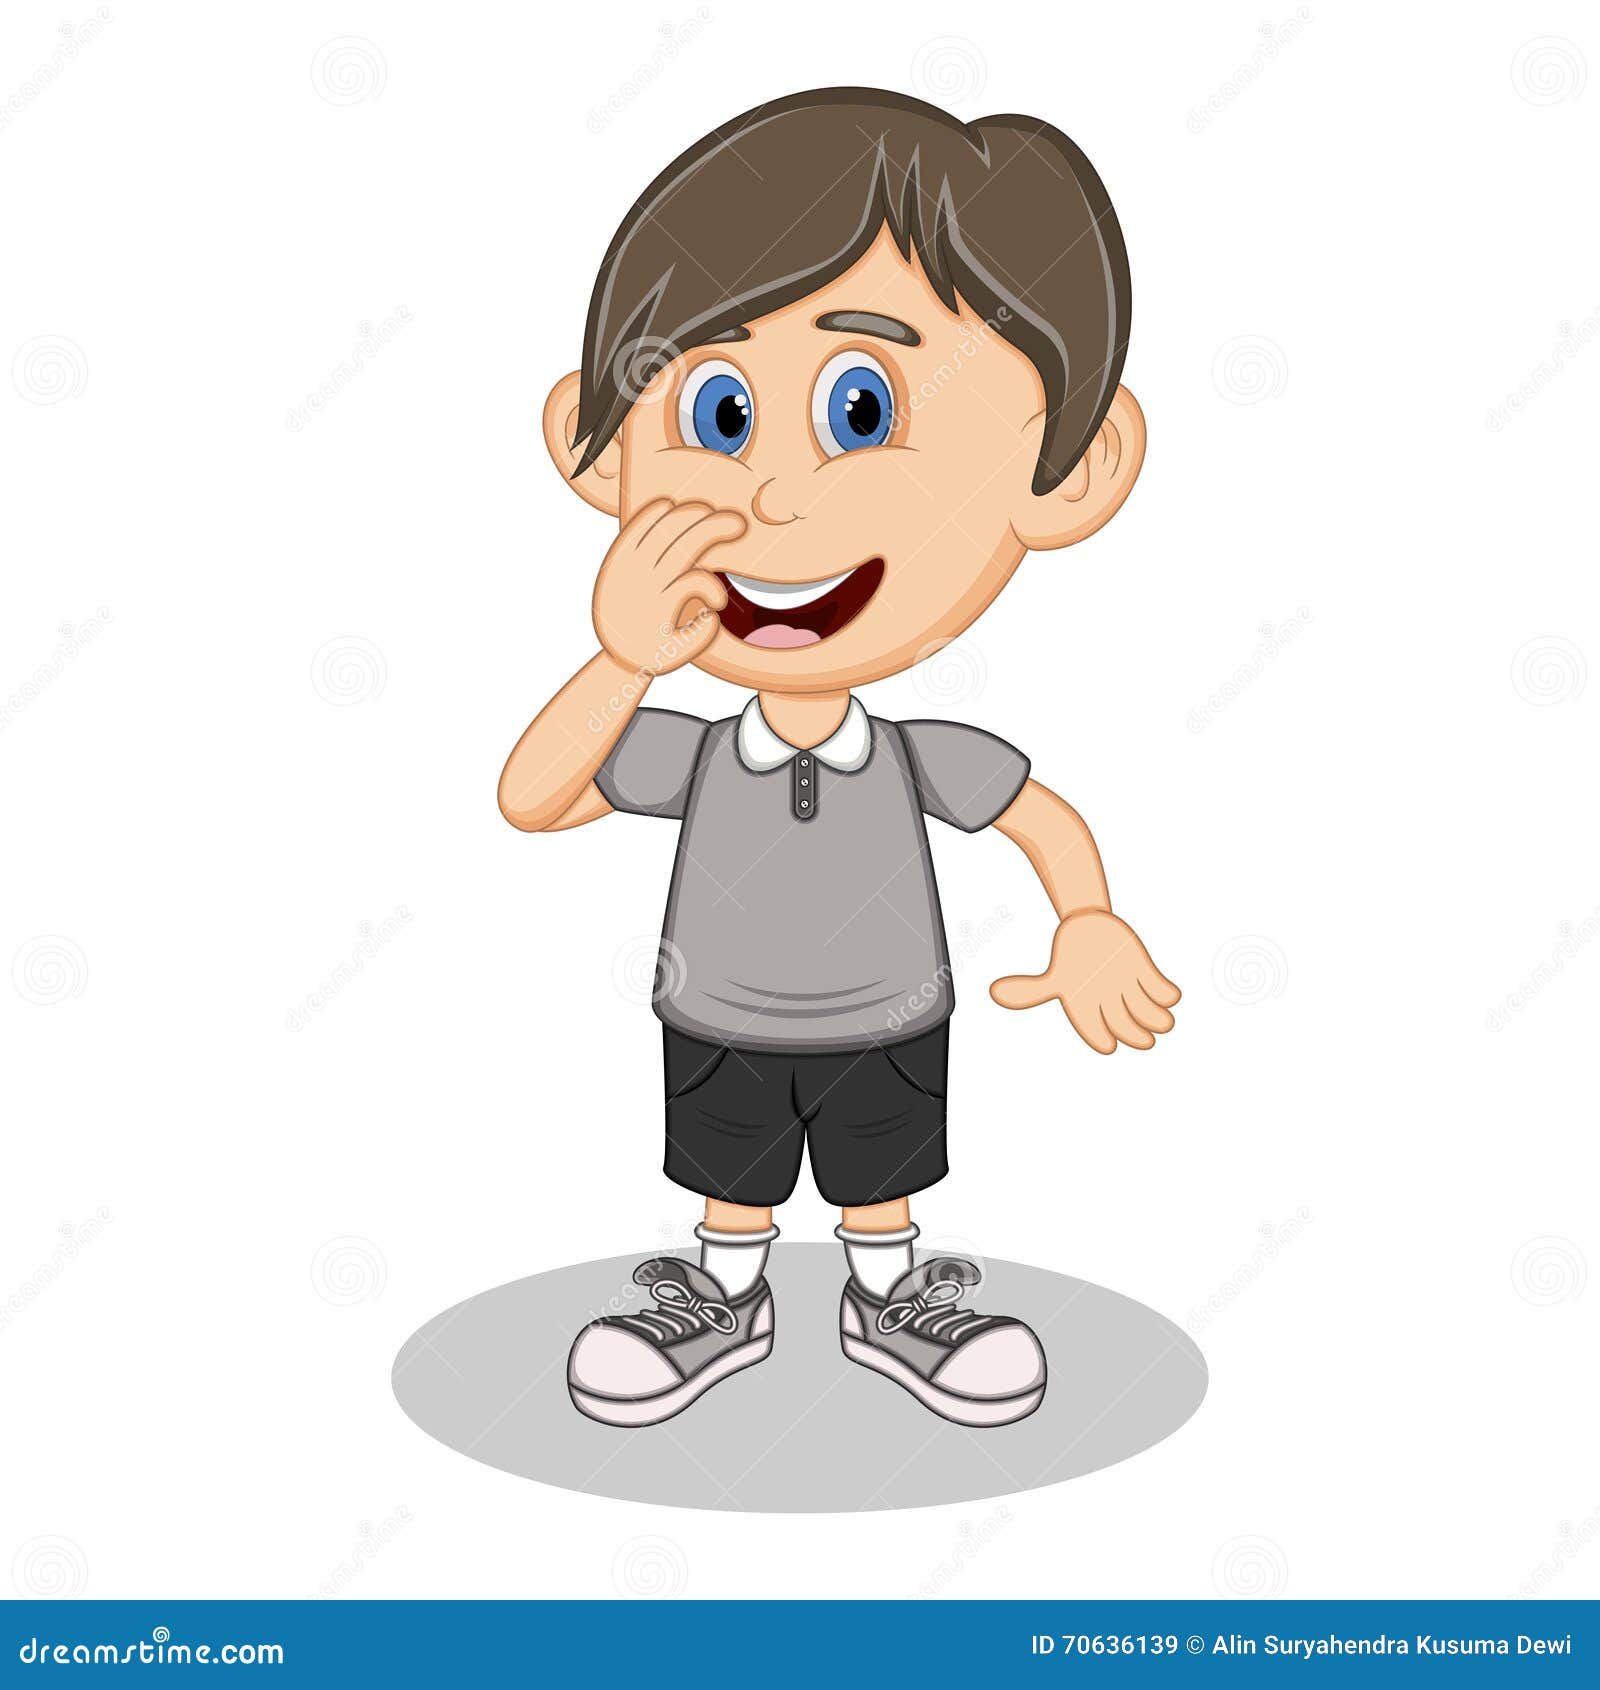 A Boy with a Gray Shirt and Black Pants Cartoon Stock Vector - Illustration  of impressed, emotion: 70636139